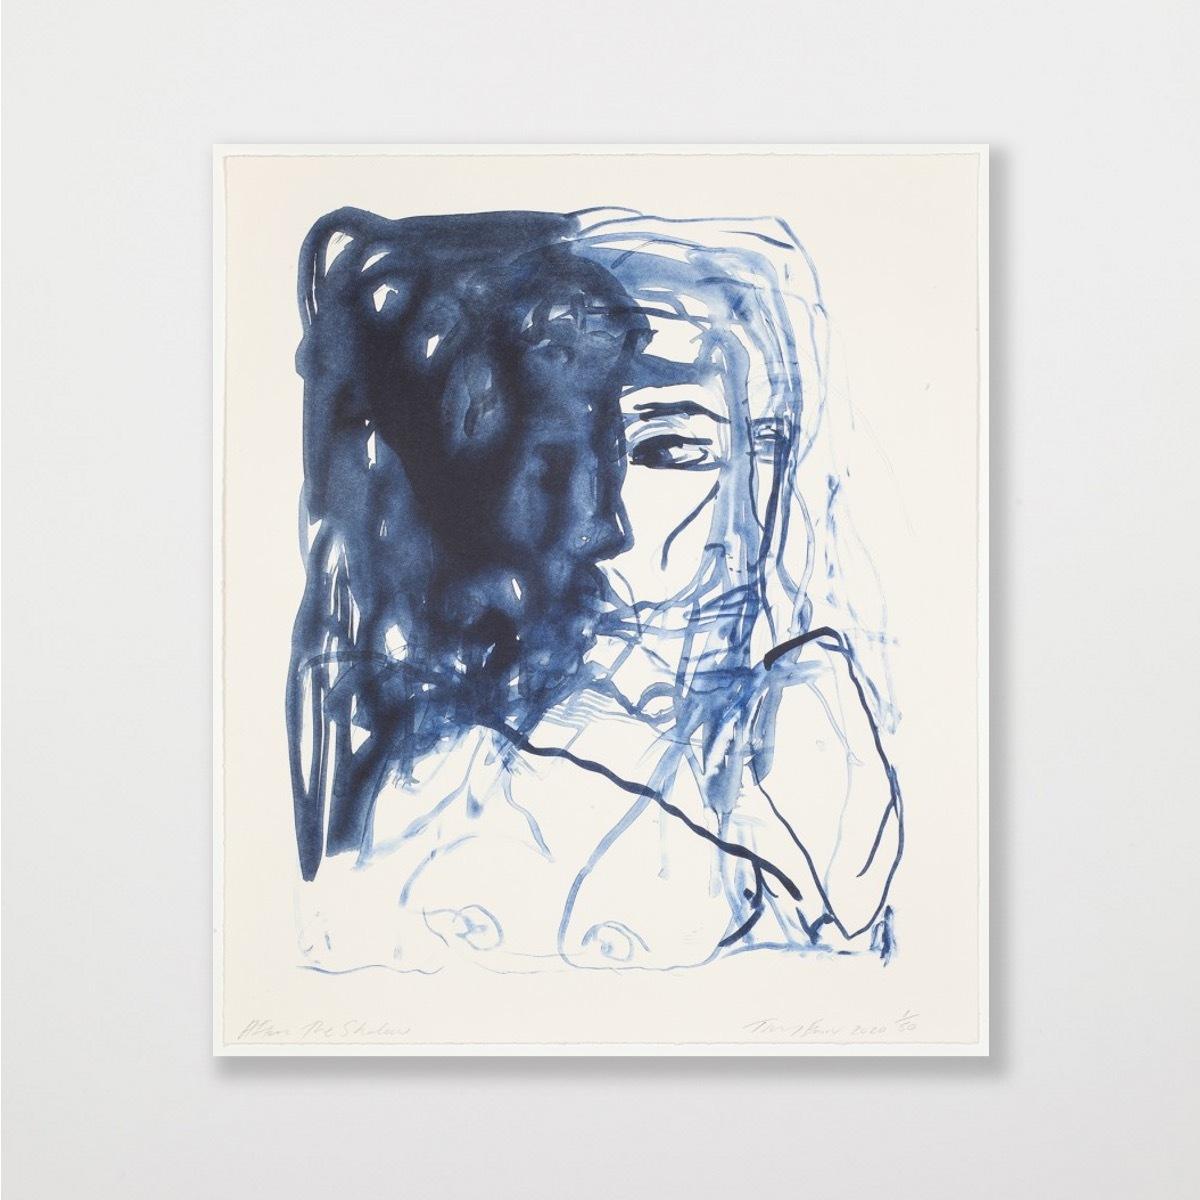 These Feelings Were True -Emin, Contemporary, YBAs, Lithograph, Blue, Portrait For Sale 2